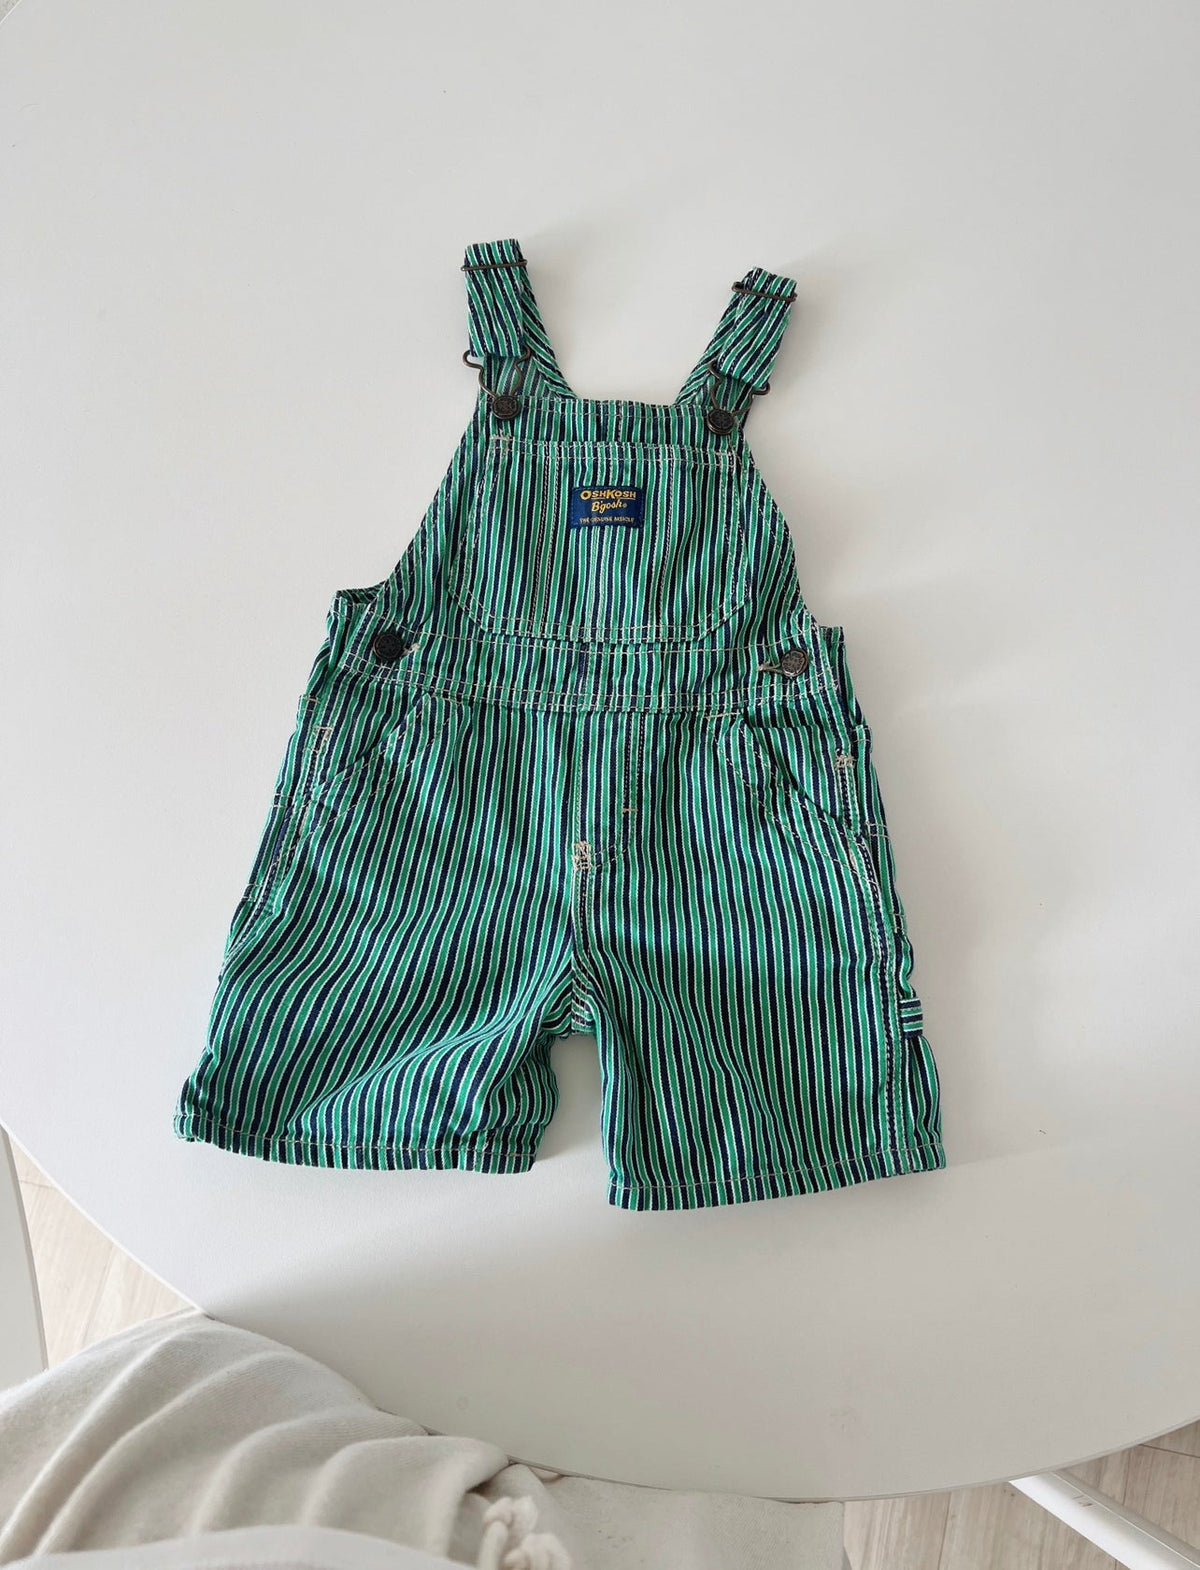 Oshkosh overall pre loved 18m+ - Marlow and Mae